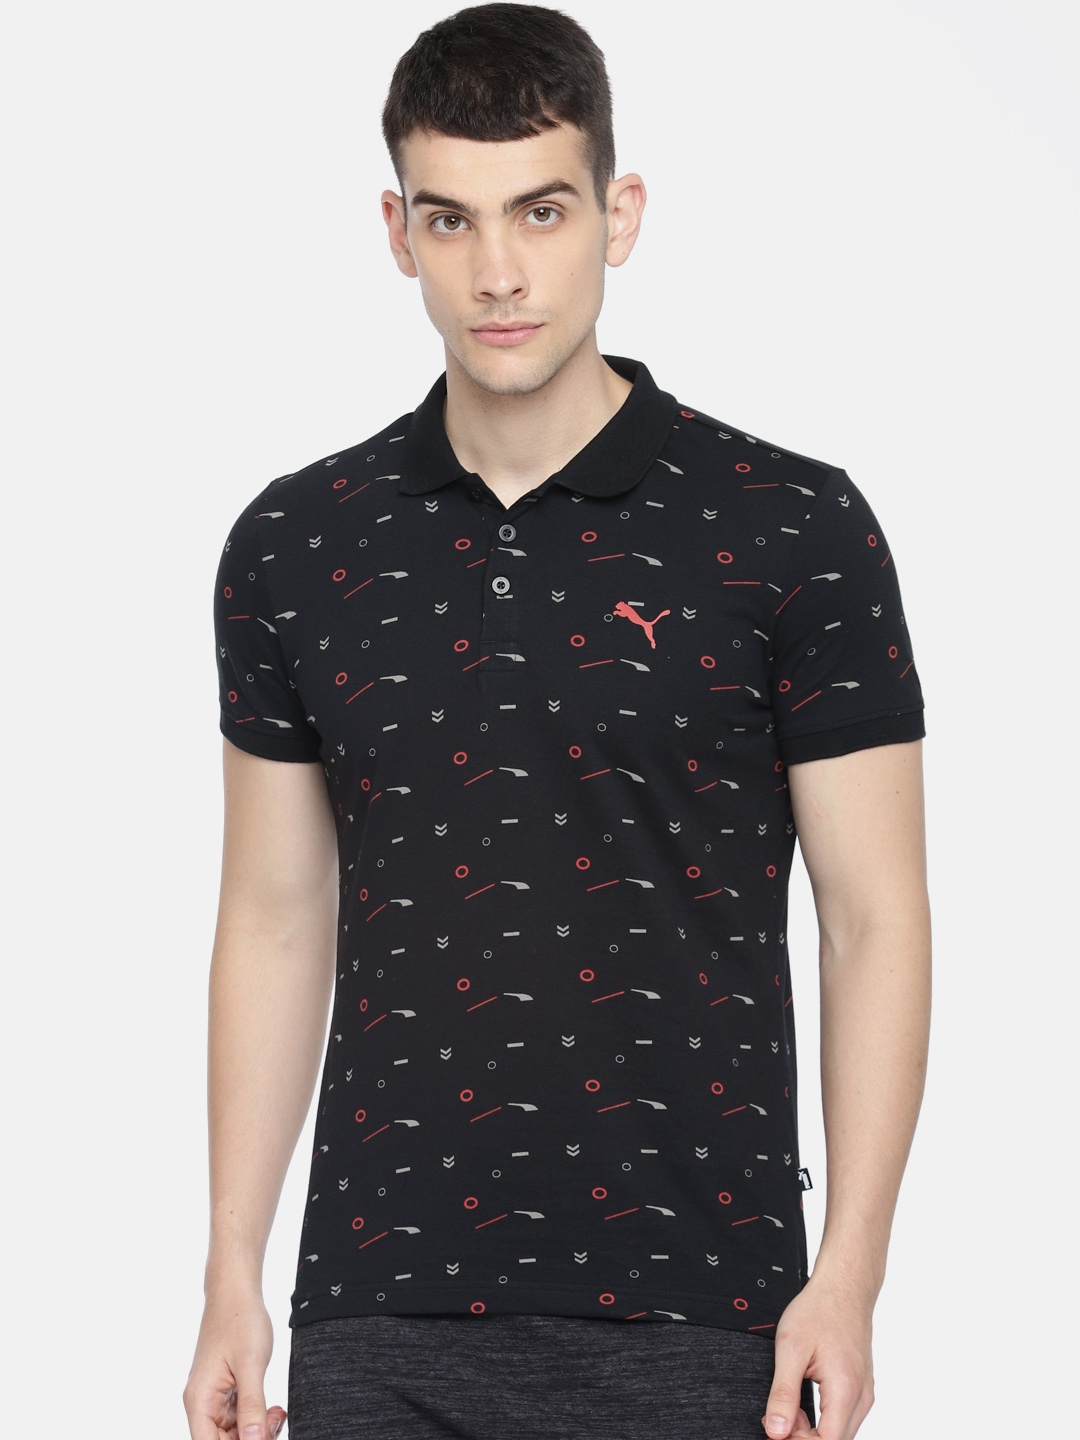 black t shirt with red collar